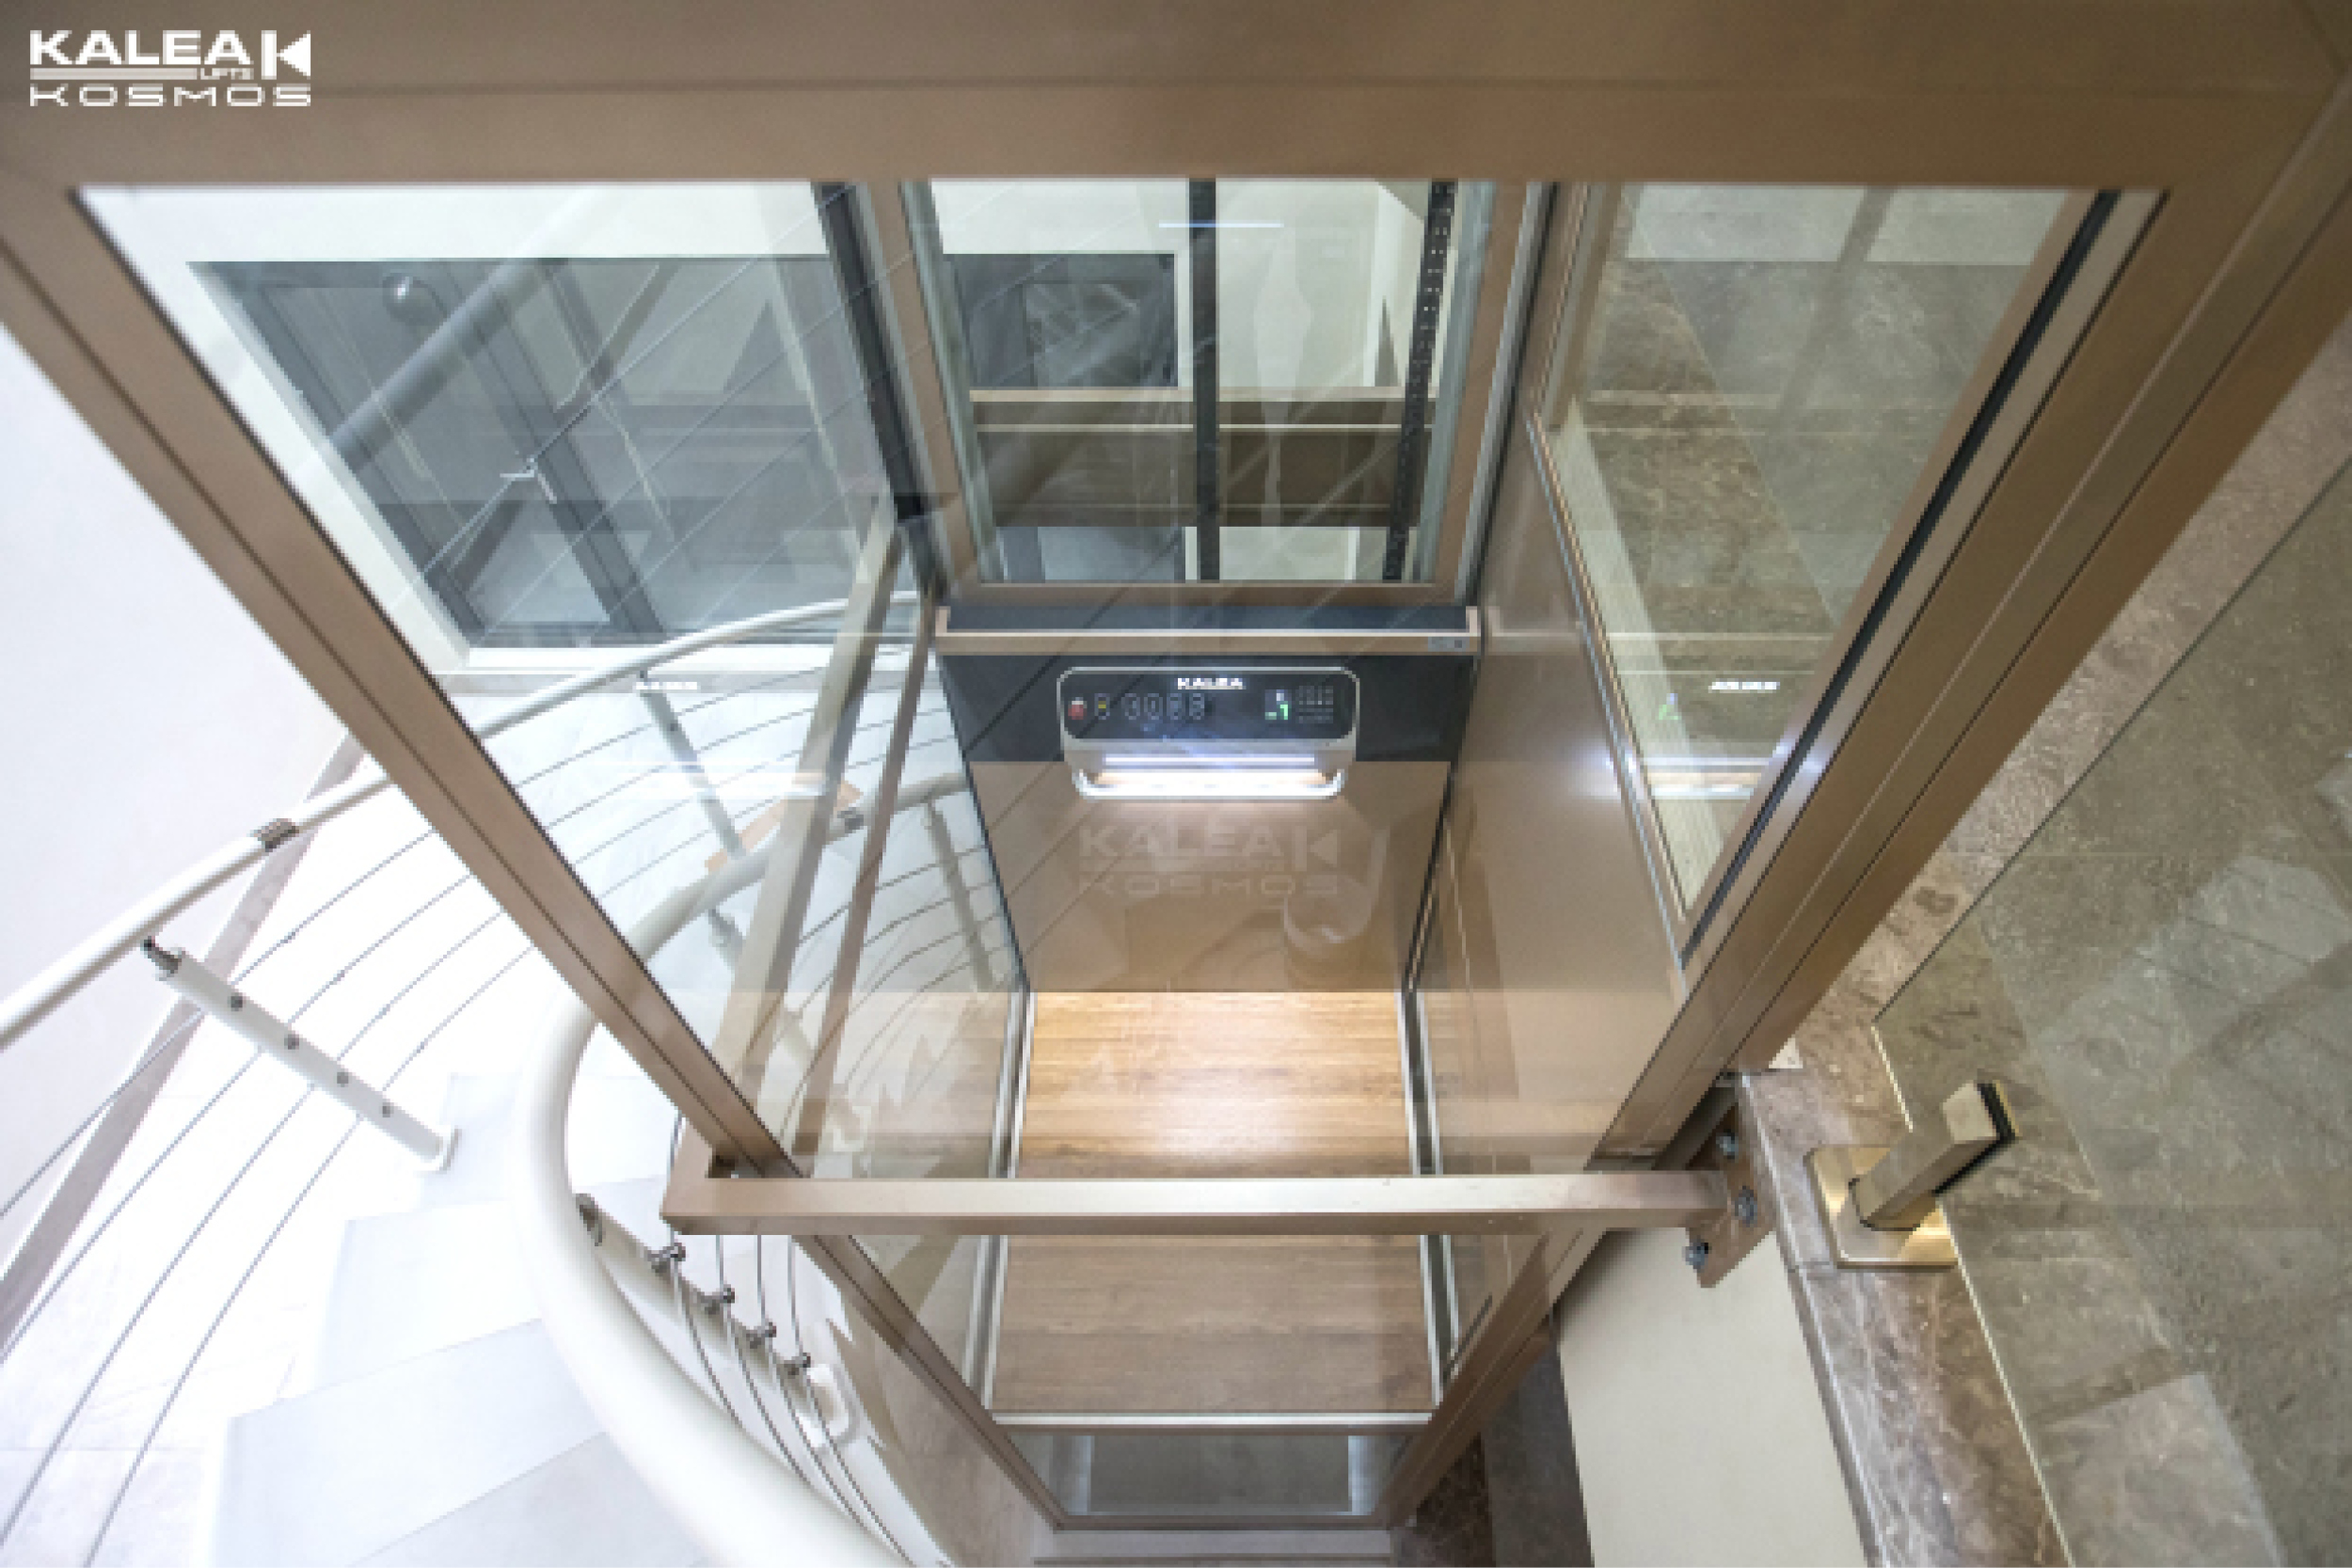 Private Home Middle Of Stair,Kosmos K70 model, All Glass Shaft Powder Coated Roman Gold